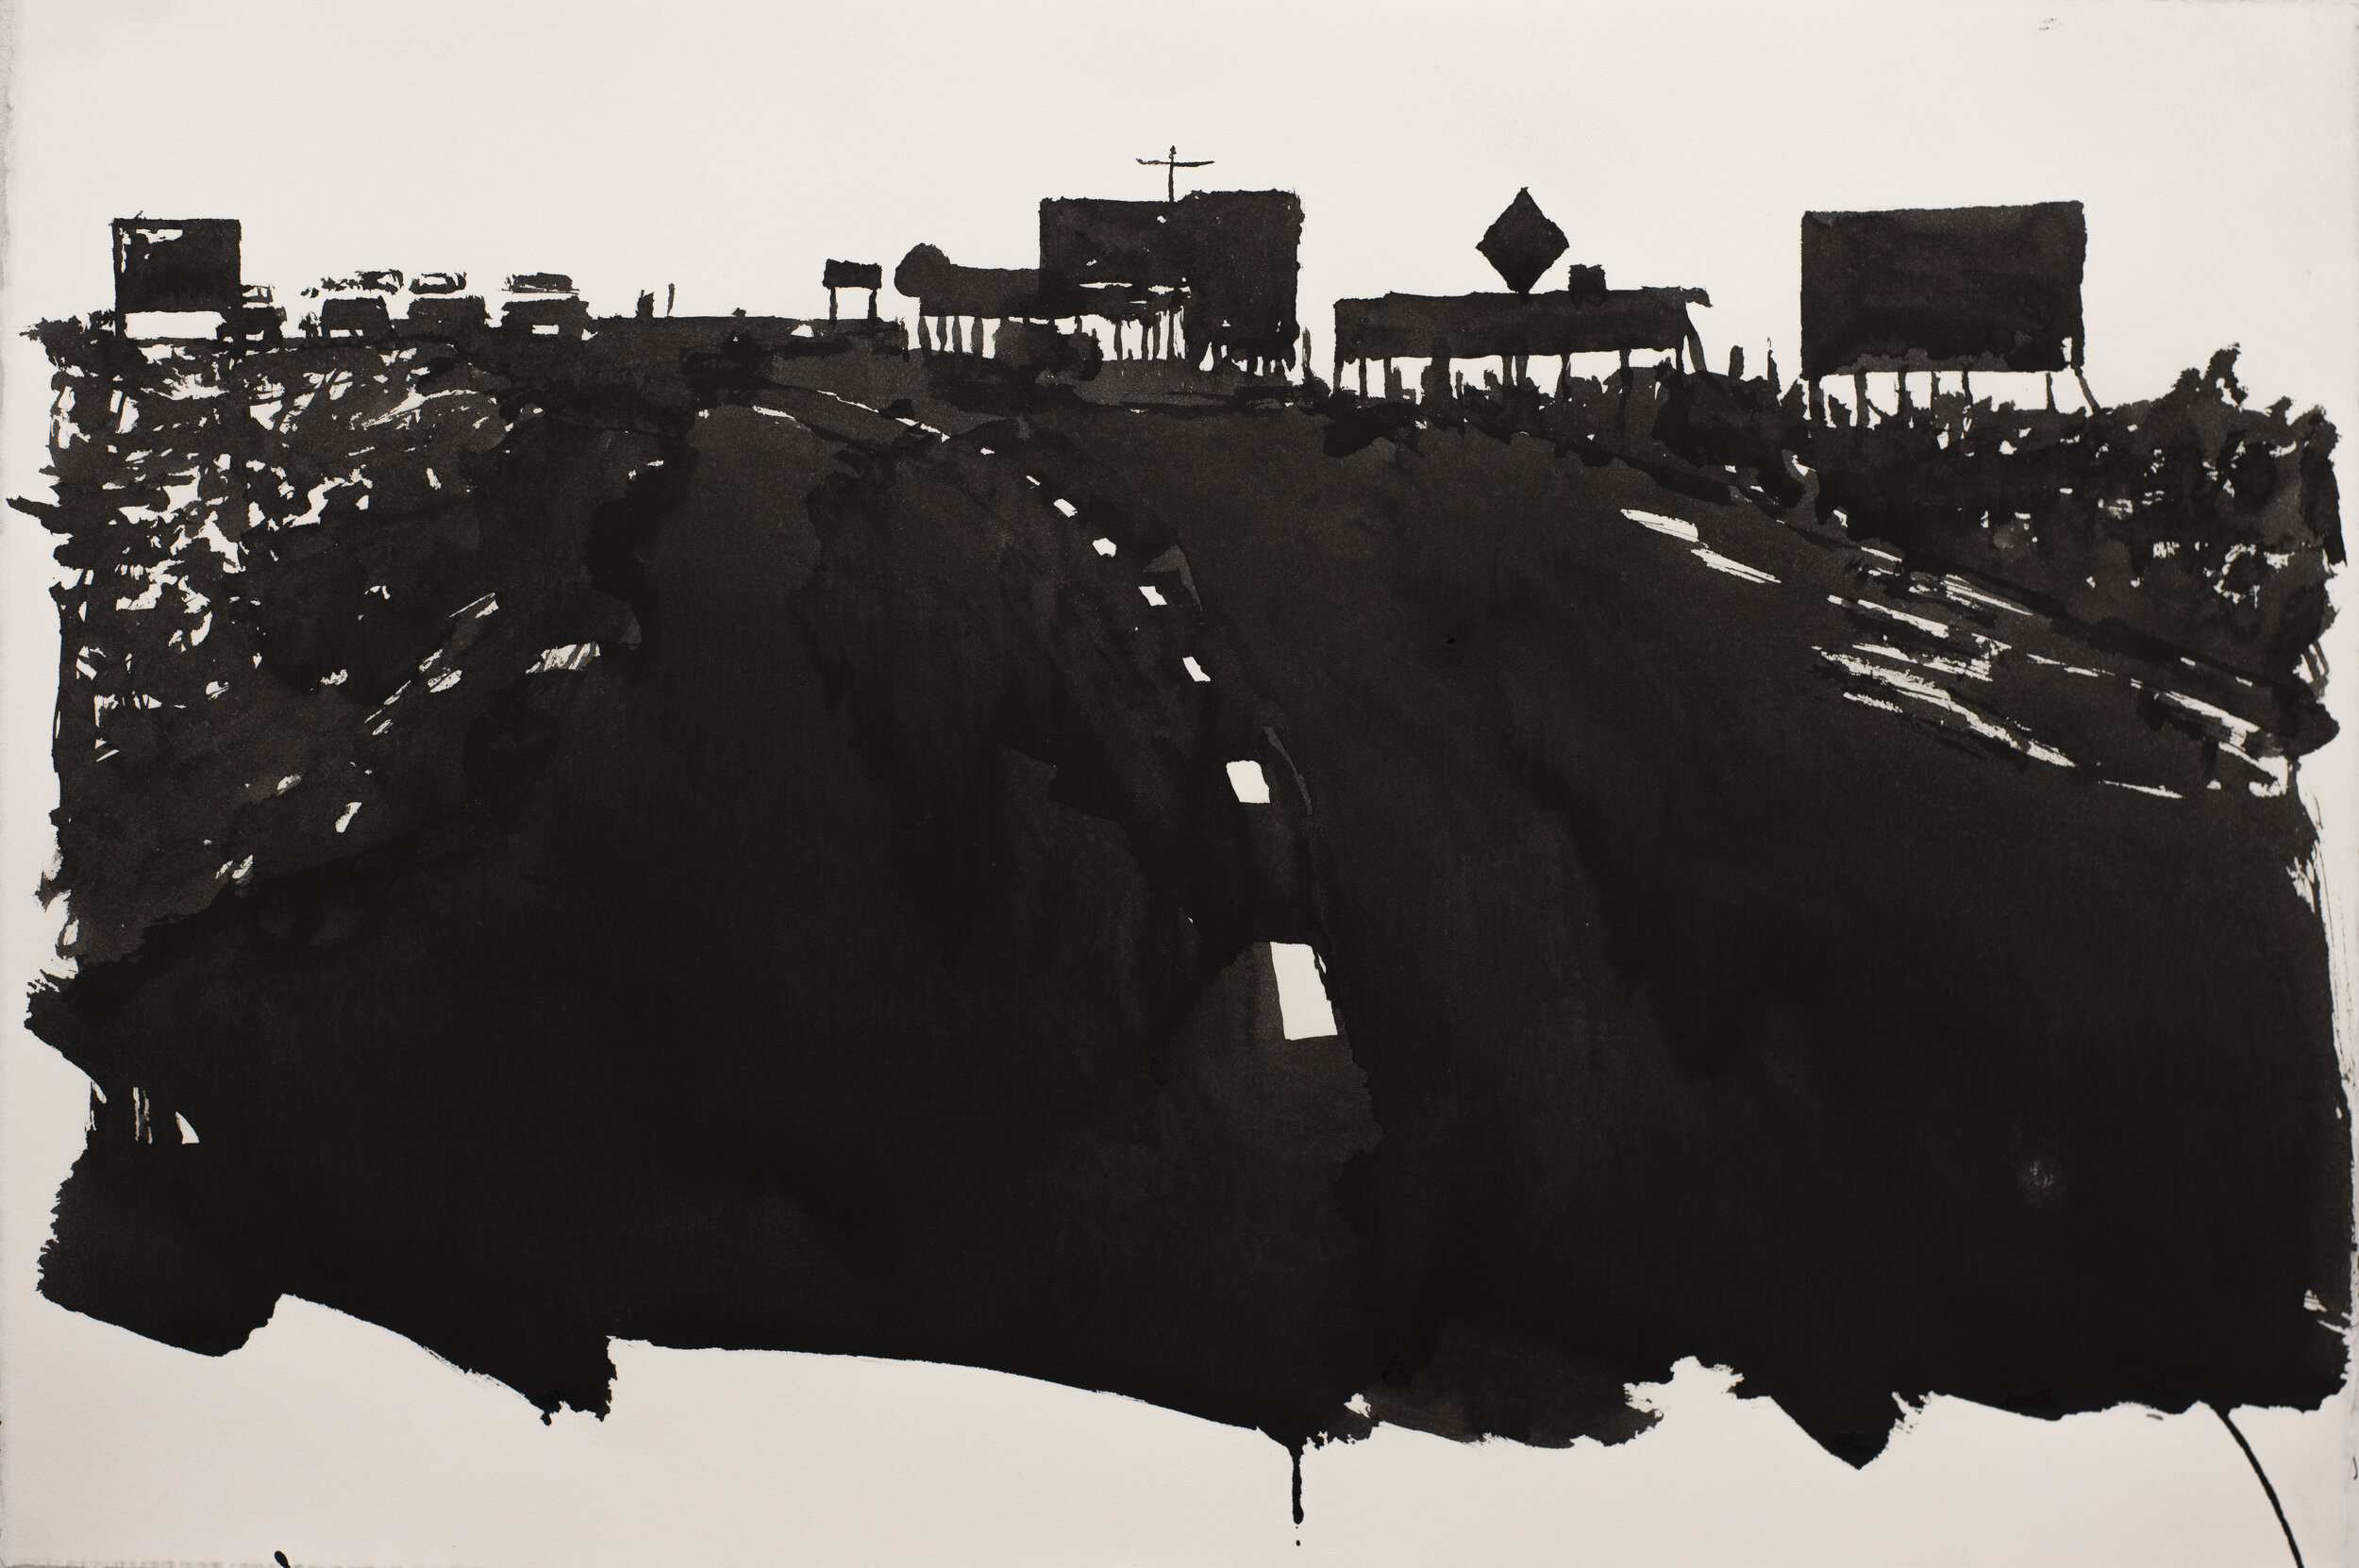  Roadway Horizon #1, india ink on paper, 15 x 22 inches, 2020 